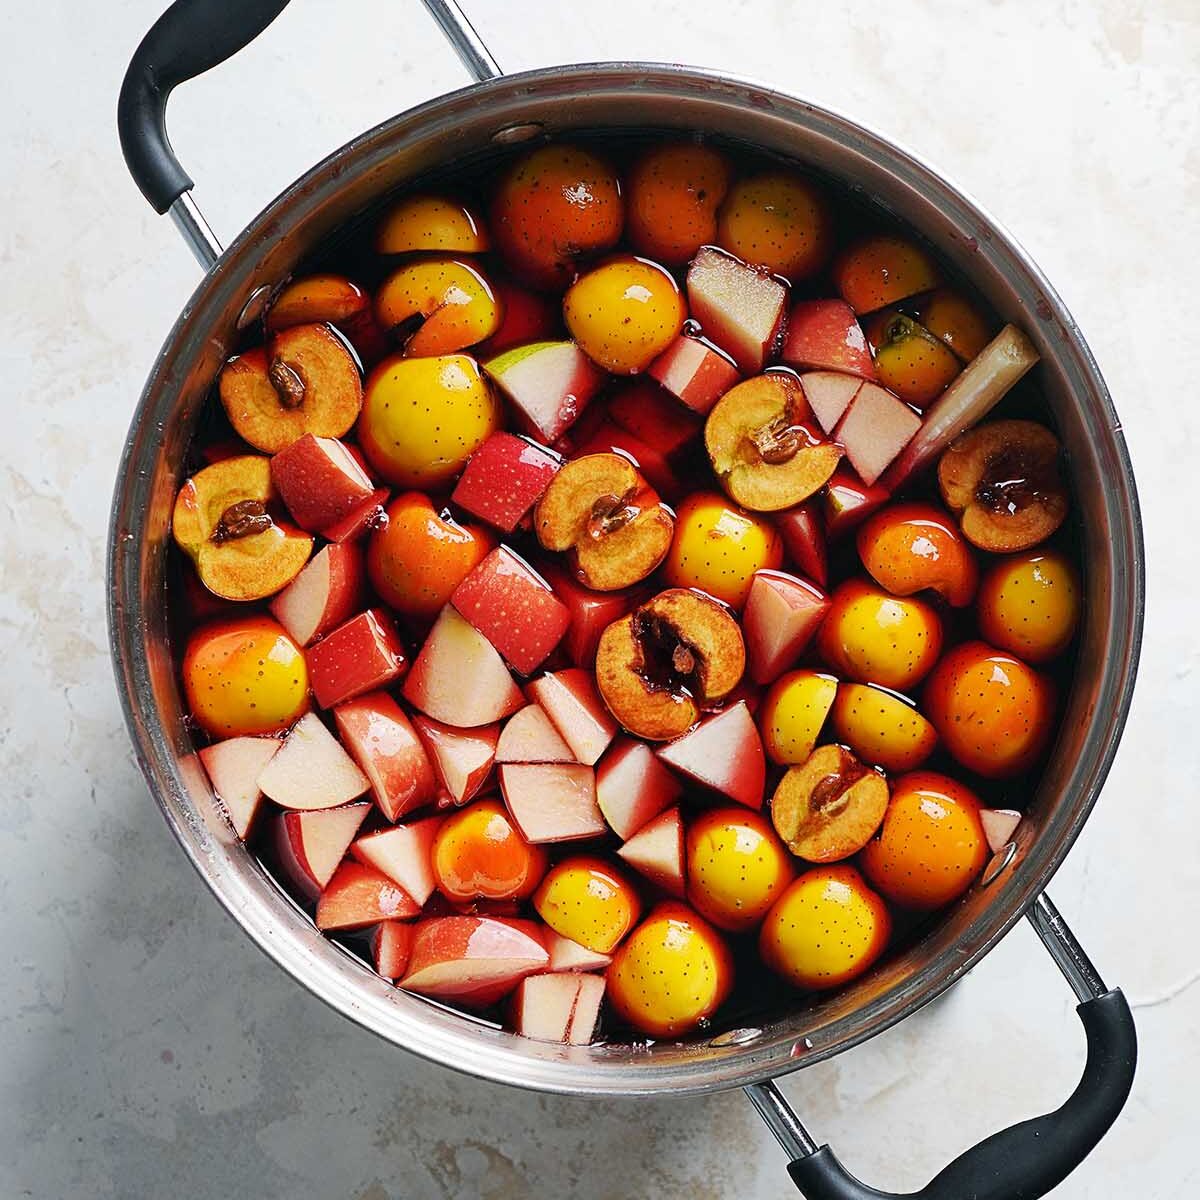 A large pot filled with fruit and punch.